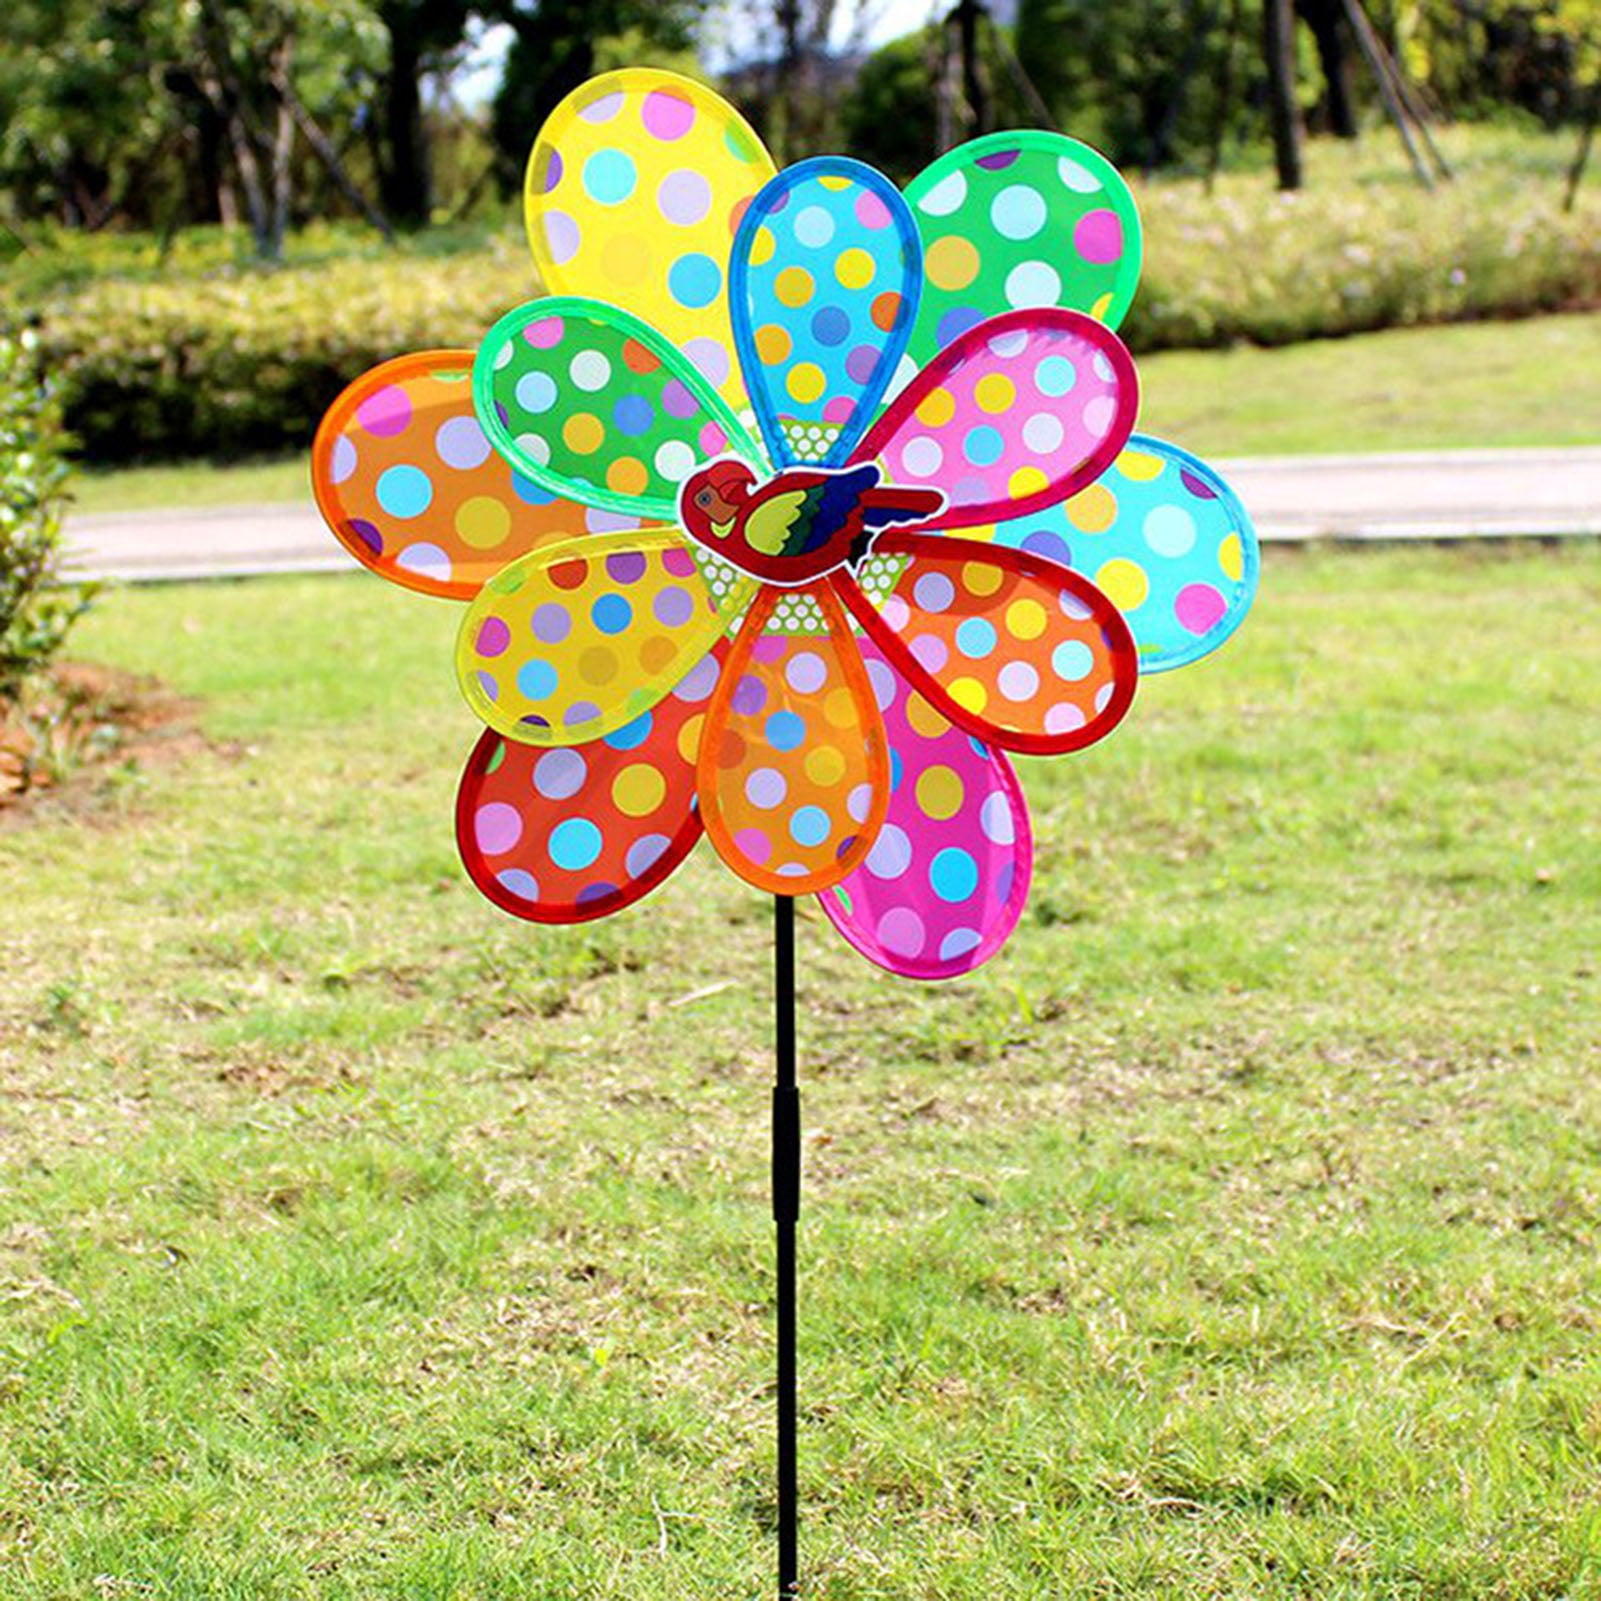 Details about   Pack of 3X Sunflower Windmill Wind Double Spinner Decoration Home Yard Garden 